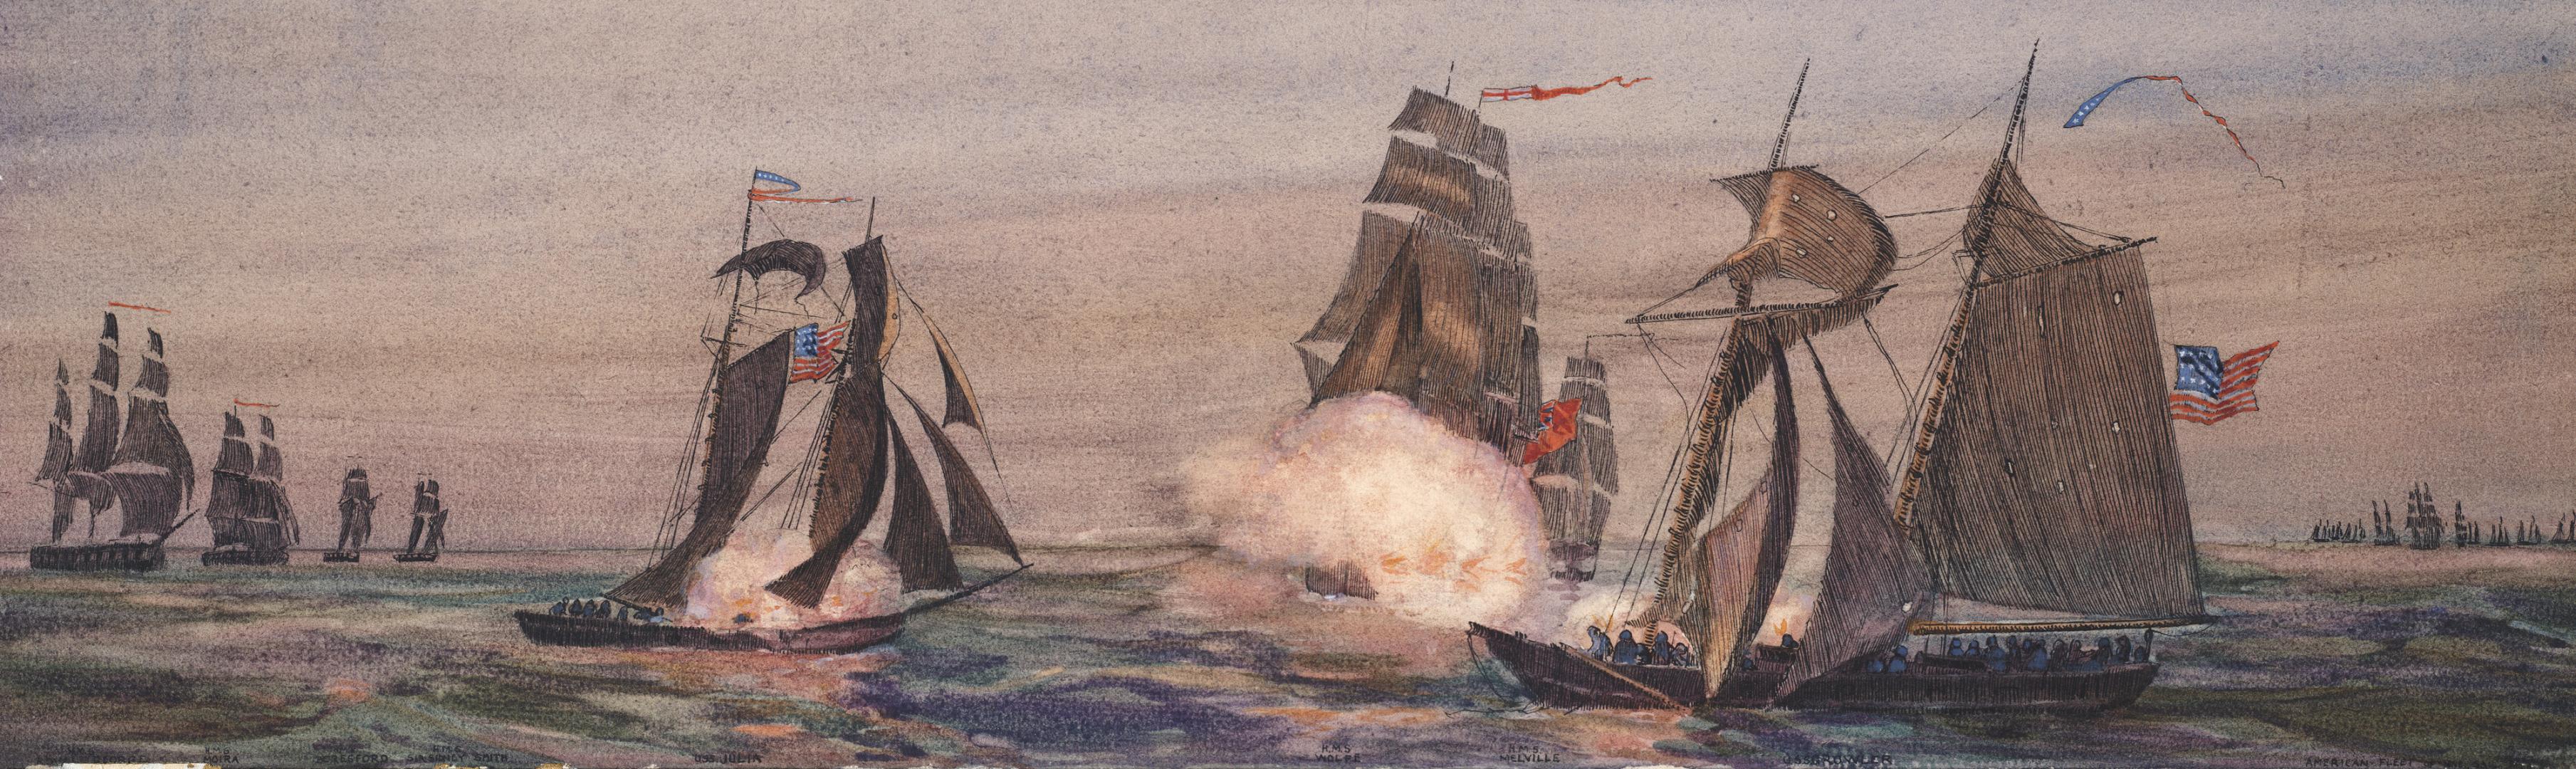 Capture of the U.S. Schooners ''Julia'' and ''Growler'' by Yeo's Squadron, Lake Ontario, 10 August 1813